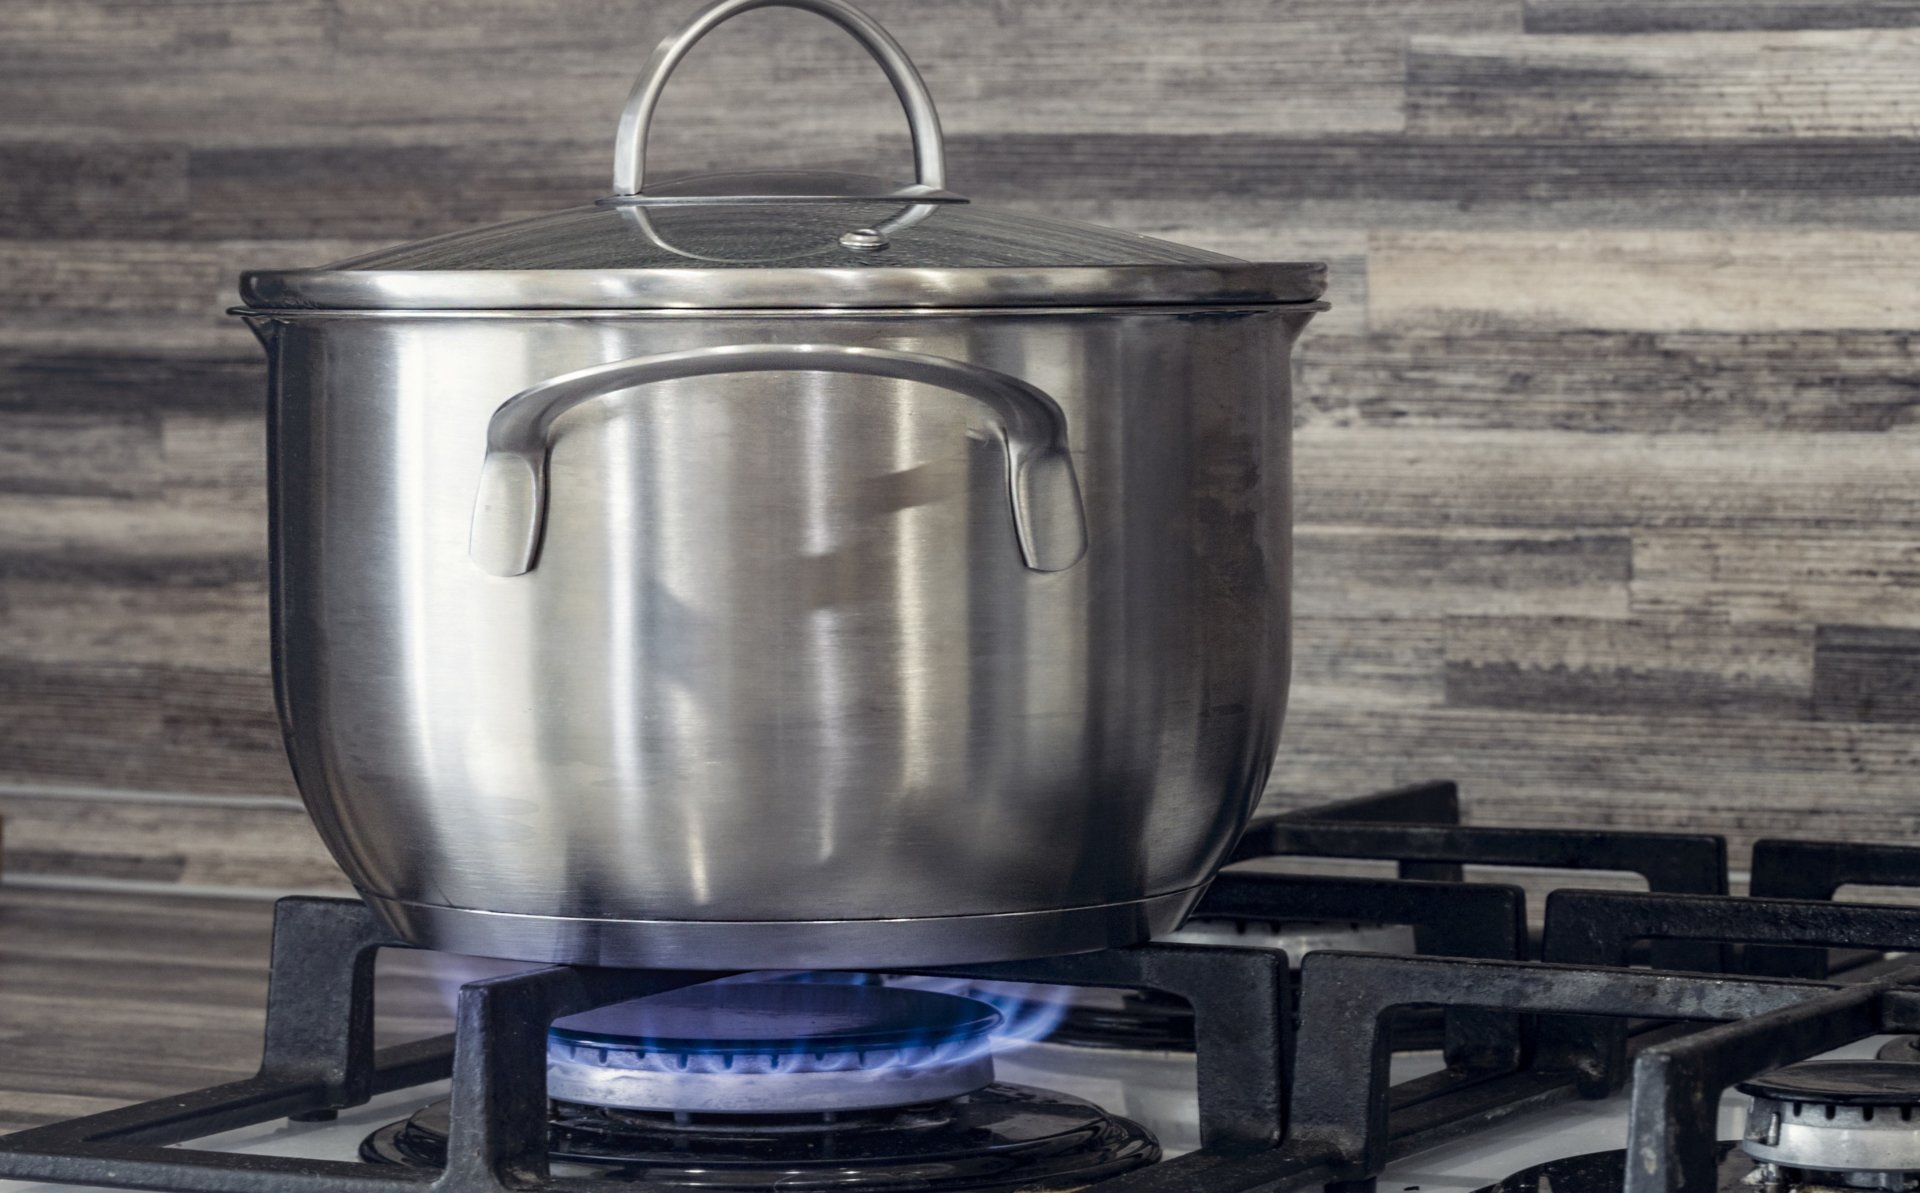 The image shows a silver cooking pot on a gas kitchen